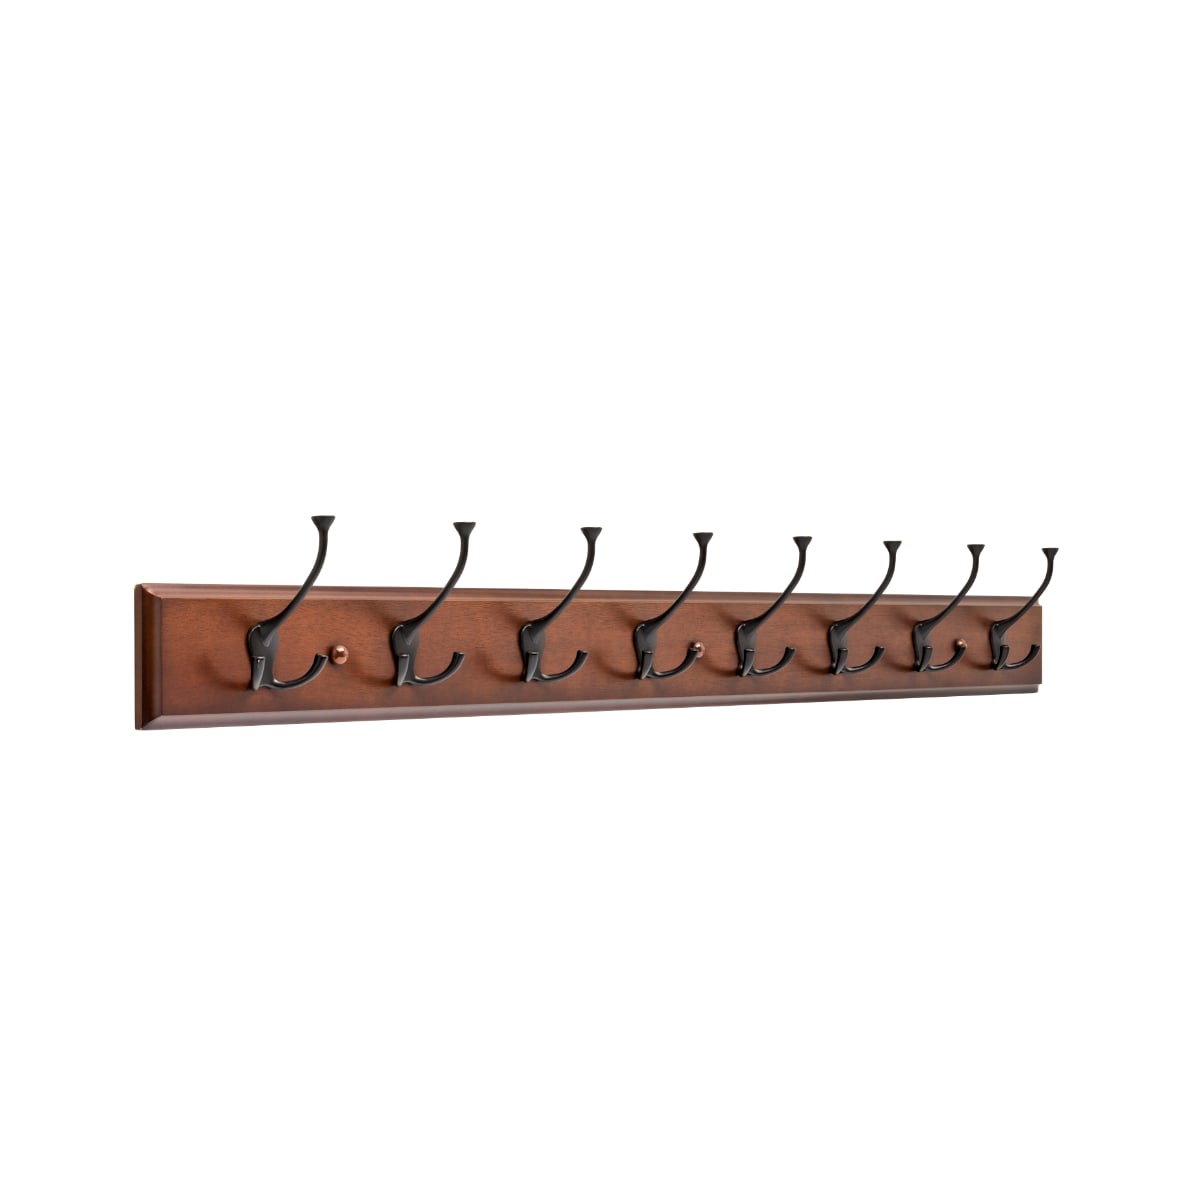 Franklin Brass 16-in White Rail Wall with 4 Coat and Hat Hooks